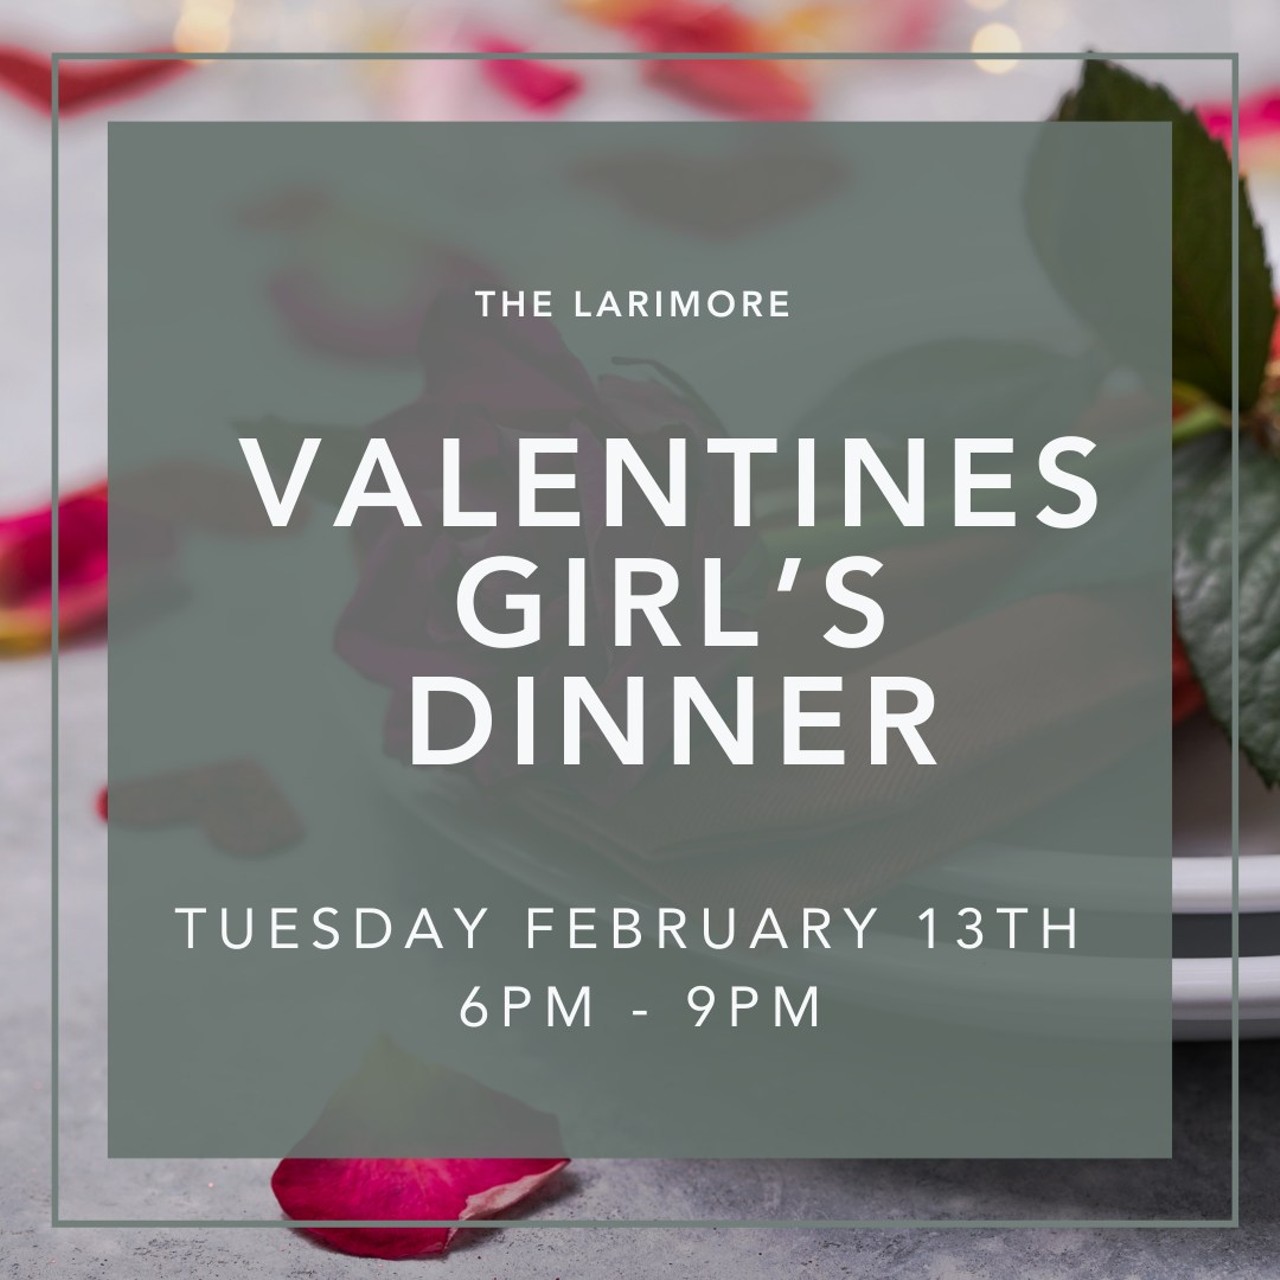 Valentine&rsquo;s Girl Dinner
Experience Girl&rsquo;s Night Out (Larimore&rsquo;s Version) at the historic Larimore Wedding Venue (11475 Lilac Avenue) from 6 to 9 p.m. on Tuesday, February 13. There will be beauty services, drinks, hors d&rsquo;ouevres, fun and venue tours. Contact Larimore at (314) 868-8009 to let them know you&rsquo;re coming.